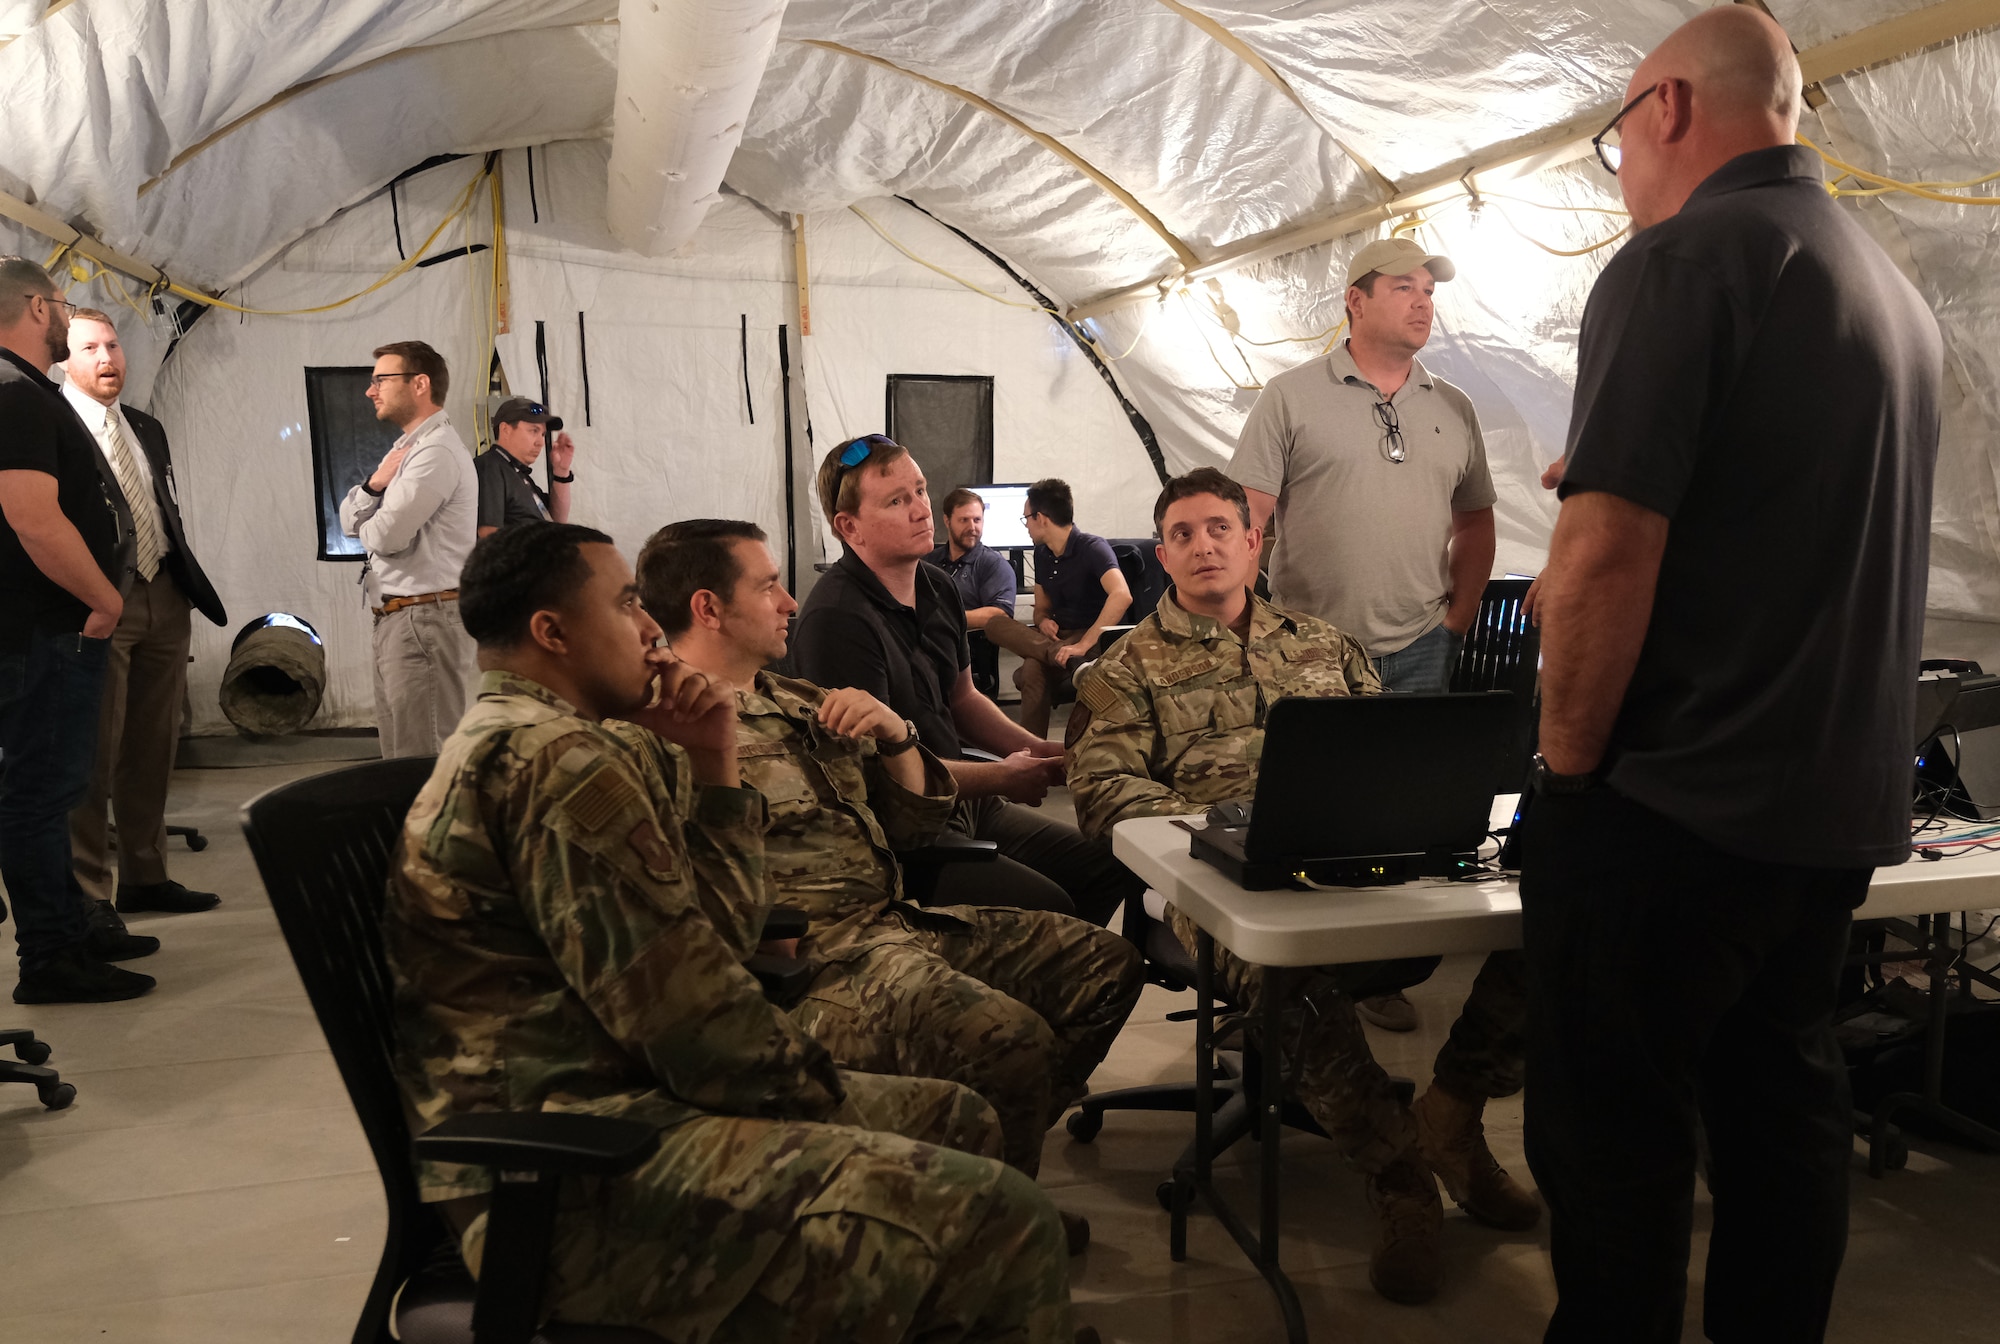 photo of four USAF Airmen sitting at a table talking to two standing civilians.  Four men are standing in the back of the tent.